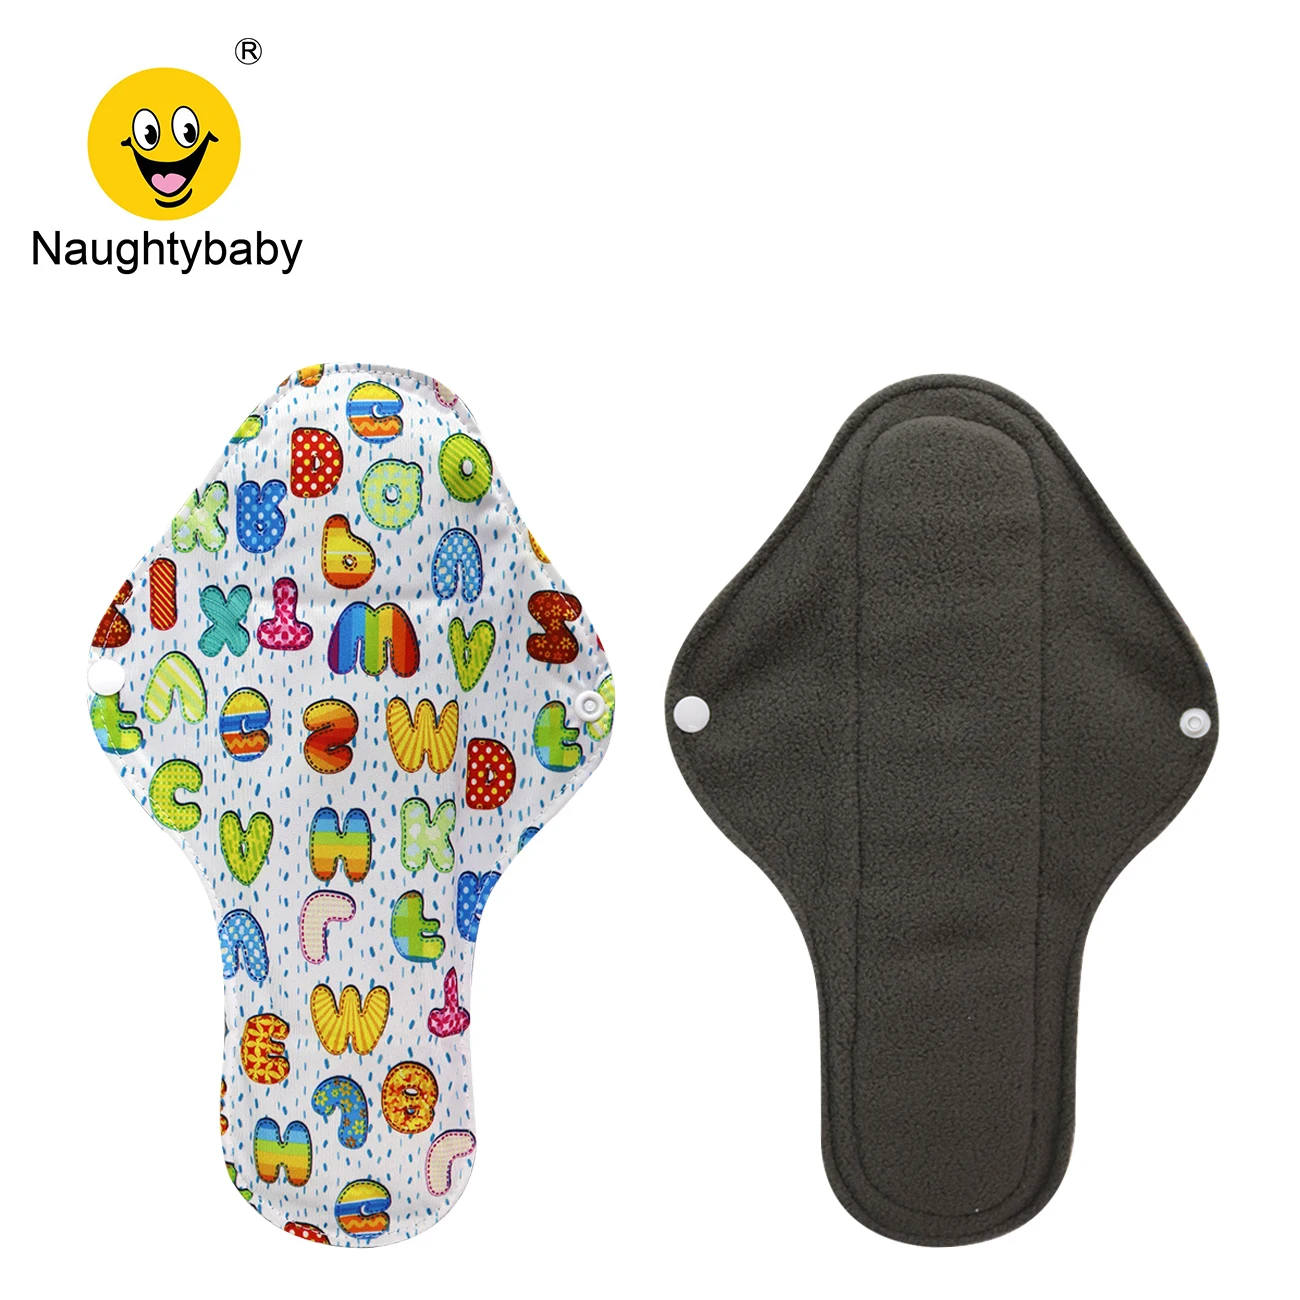 Hot sale Bamboo Mama's Cloth Pad Bamboo Sanitary pads For Women Girls Printed Menstrual Pads Liners Washable 100pcs